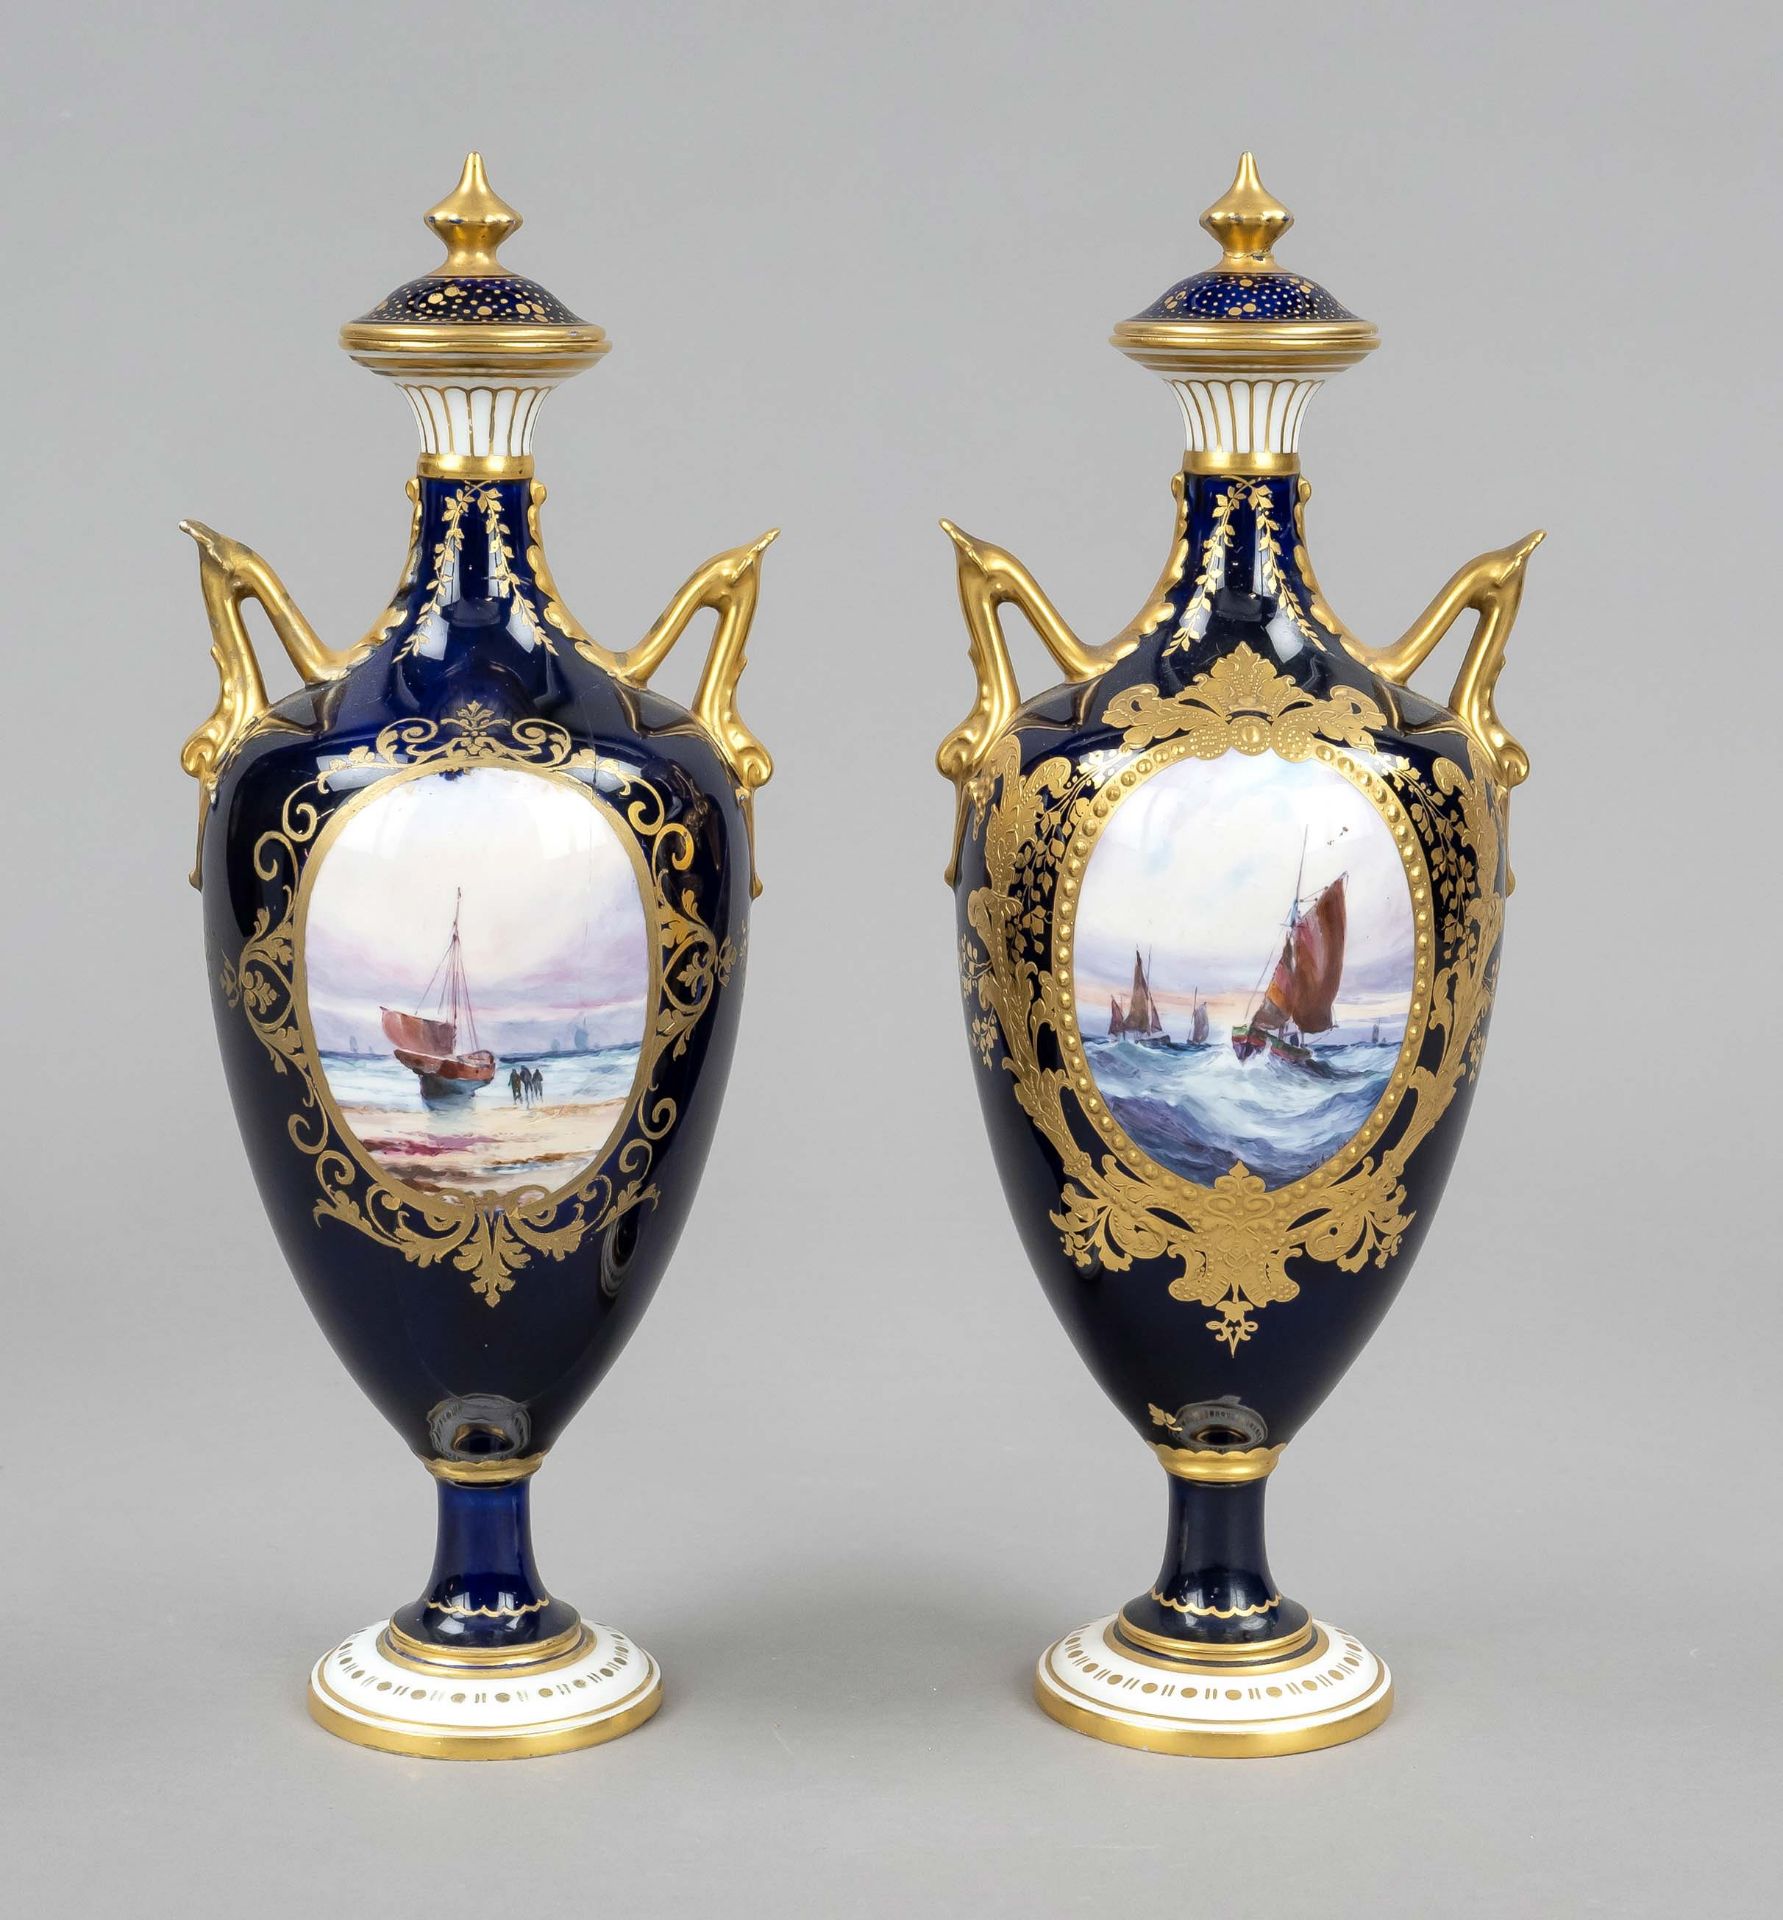 Pair of vases, Royal Crown Derby, England, 1920-30s, slender ovoid form with upturned handles,